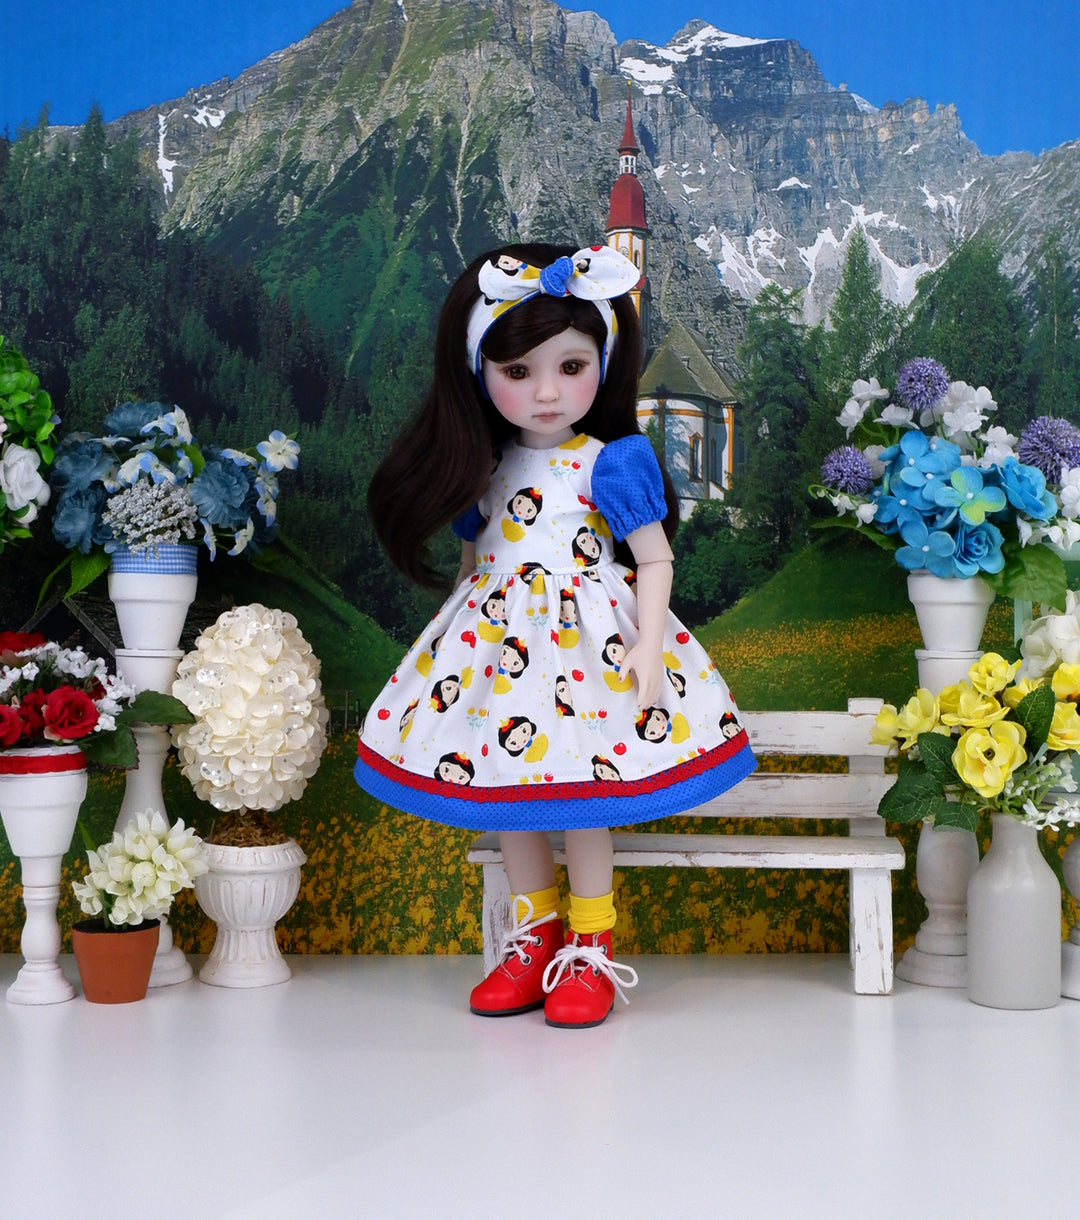 Kawaii Snow White - dress and boots for Ruby Red Fashion Friends doll